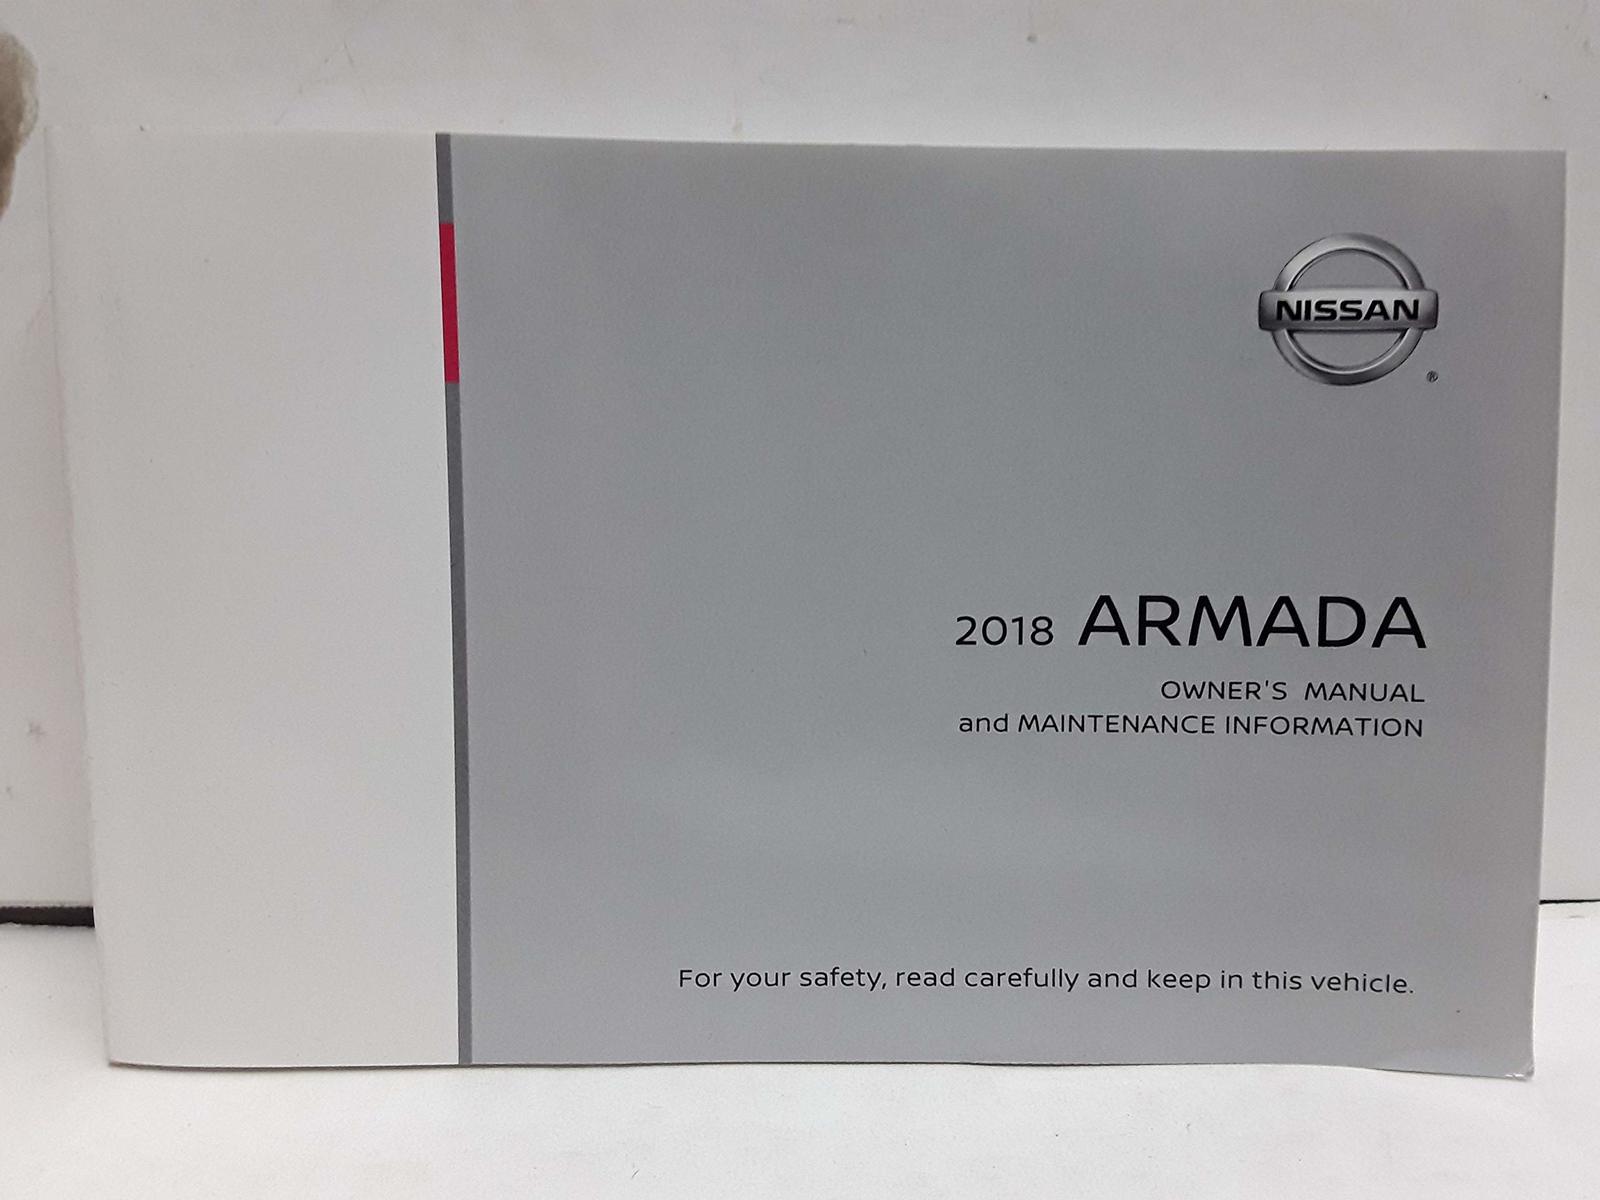 Primary image for 2018 Nissan Armada owner's manual [Paperback] Nissan Motor Company